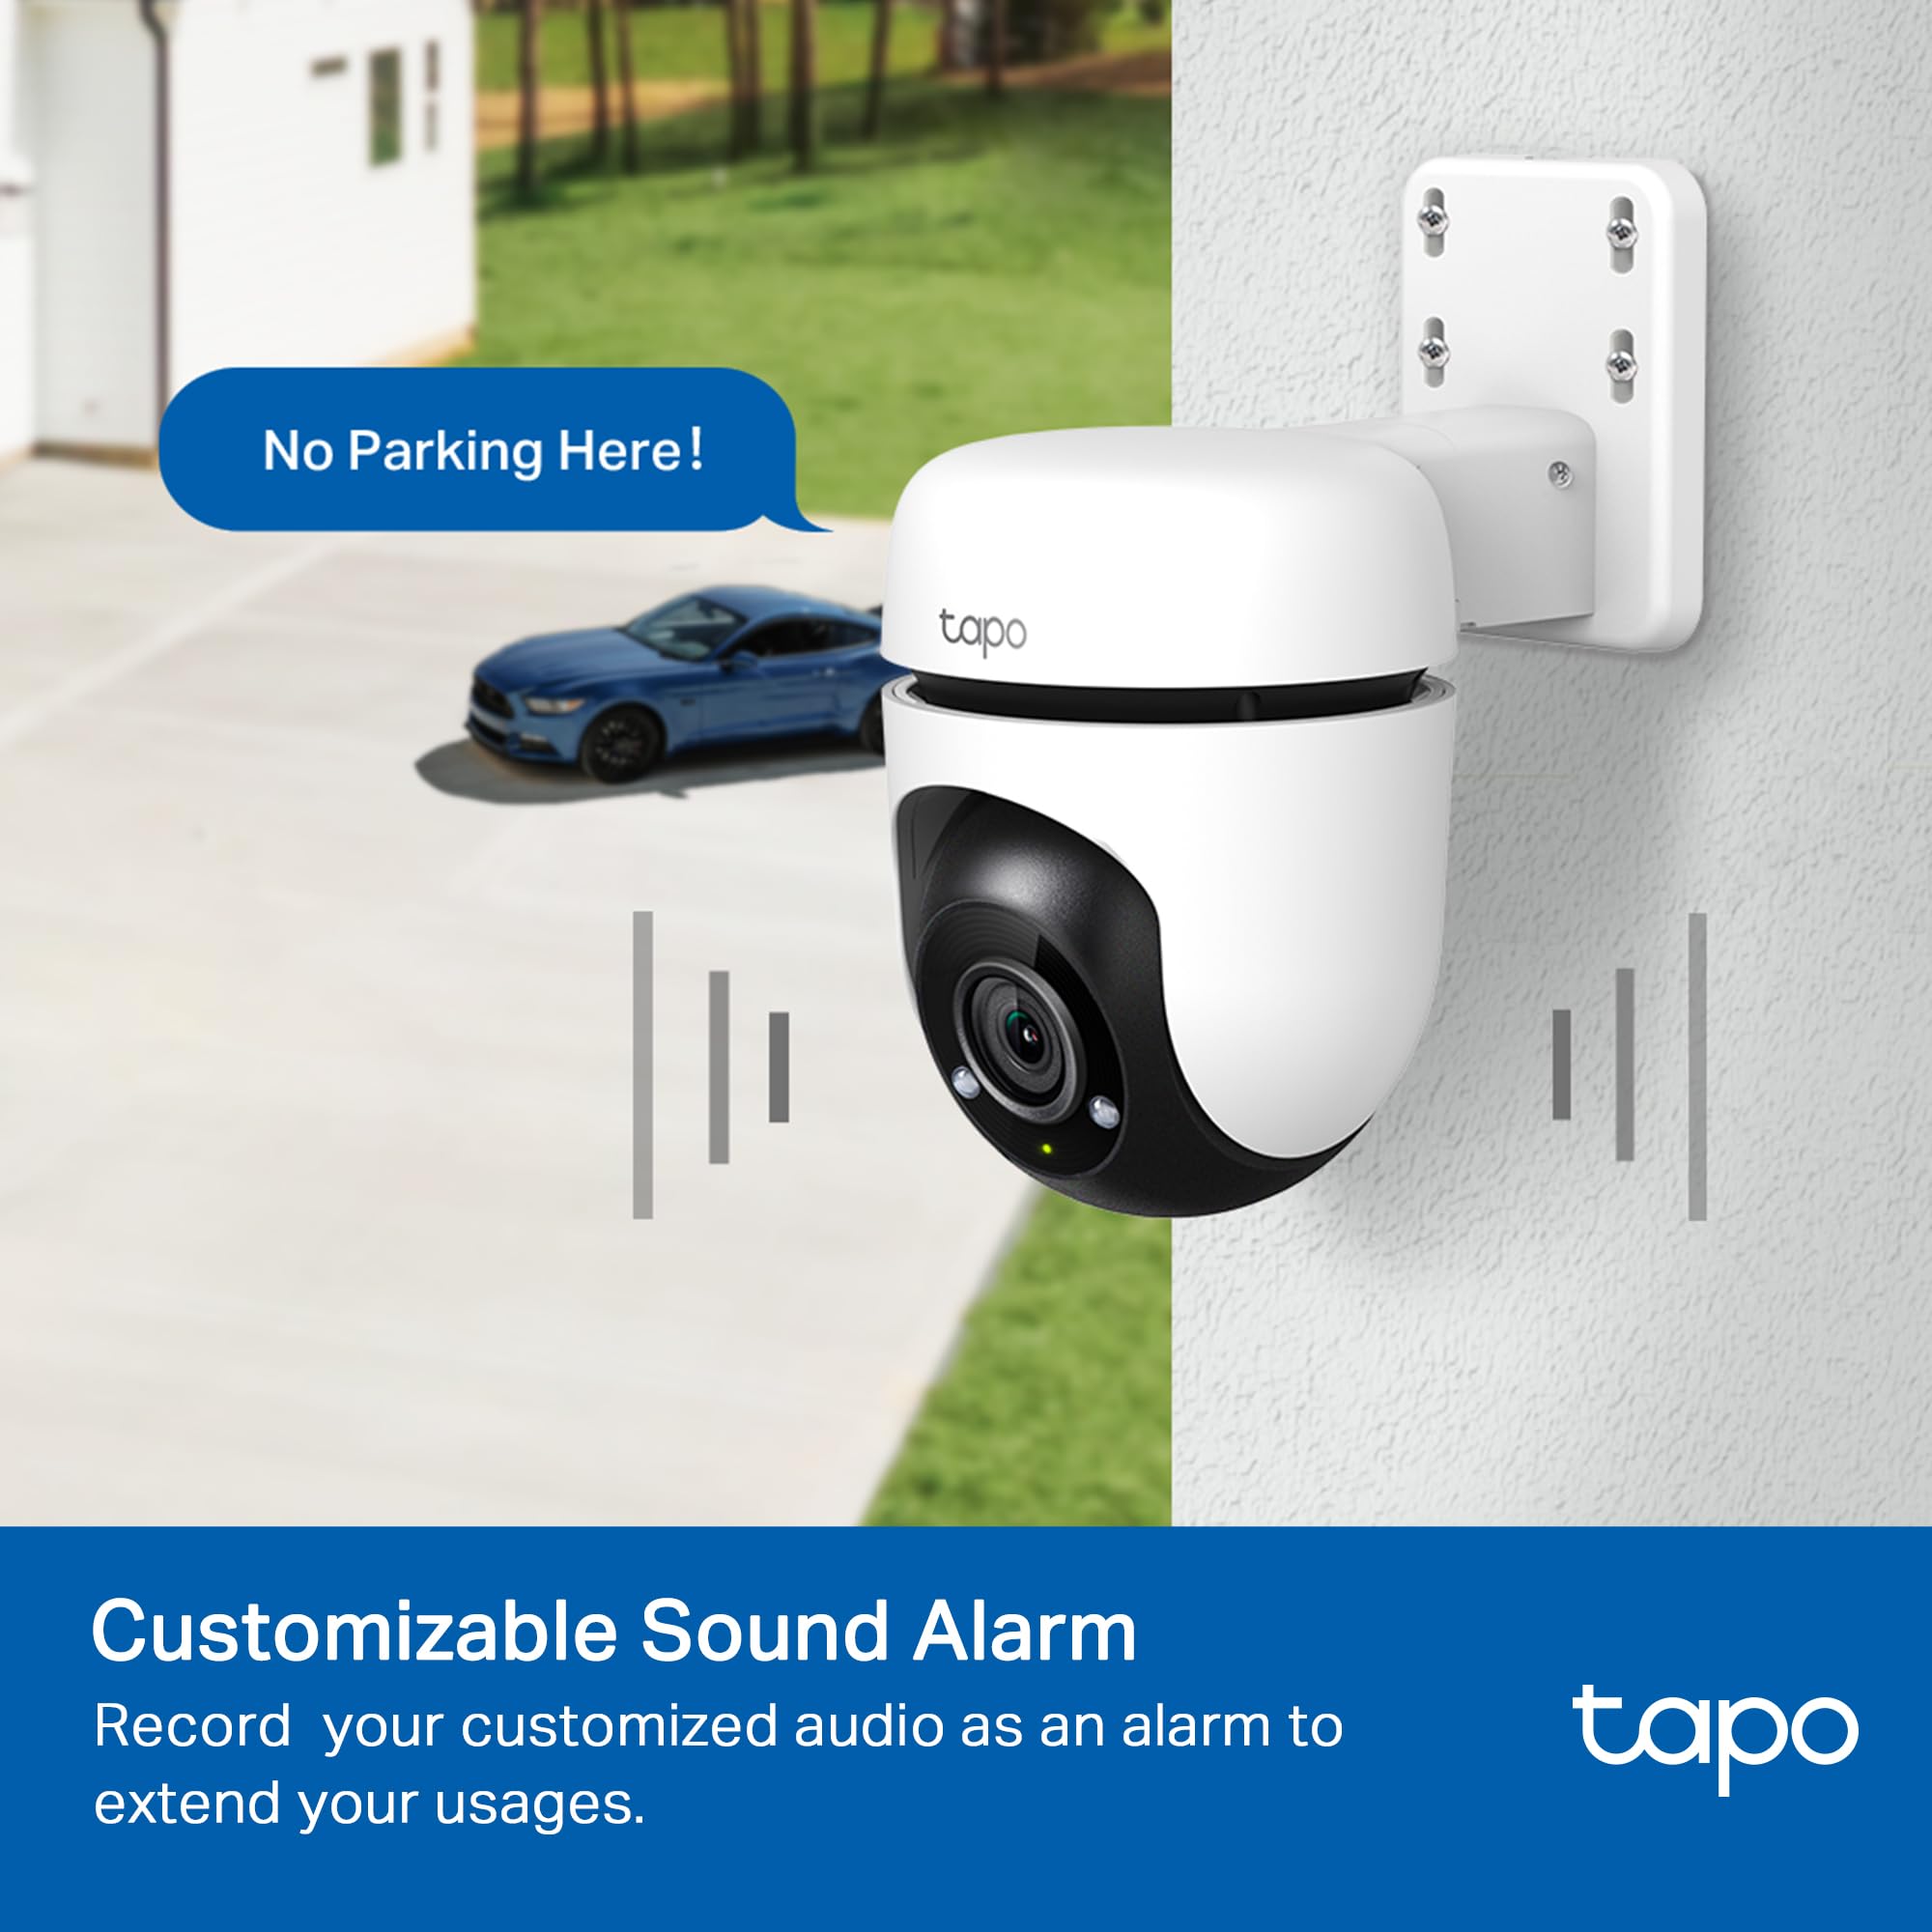 Tapo 1080P Outdoor Wired Pan/Tilt Security Wi-Fi Camera, 360° View, Motion Tracking, Works with Alexa & Google Home, Night Vision, Free AI Detection, Cloud & SD Card Storage(up to 512GB), Tapo C500